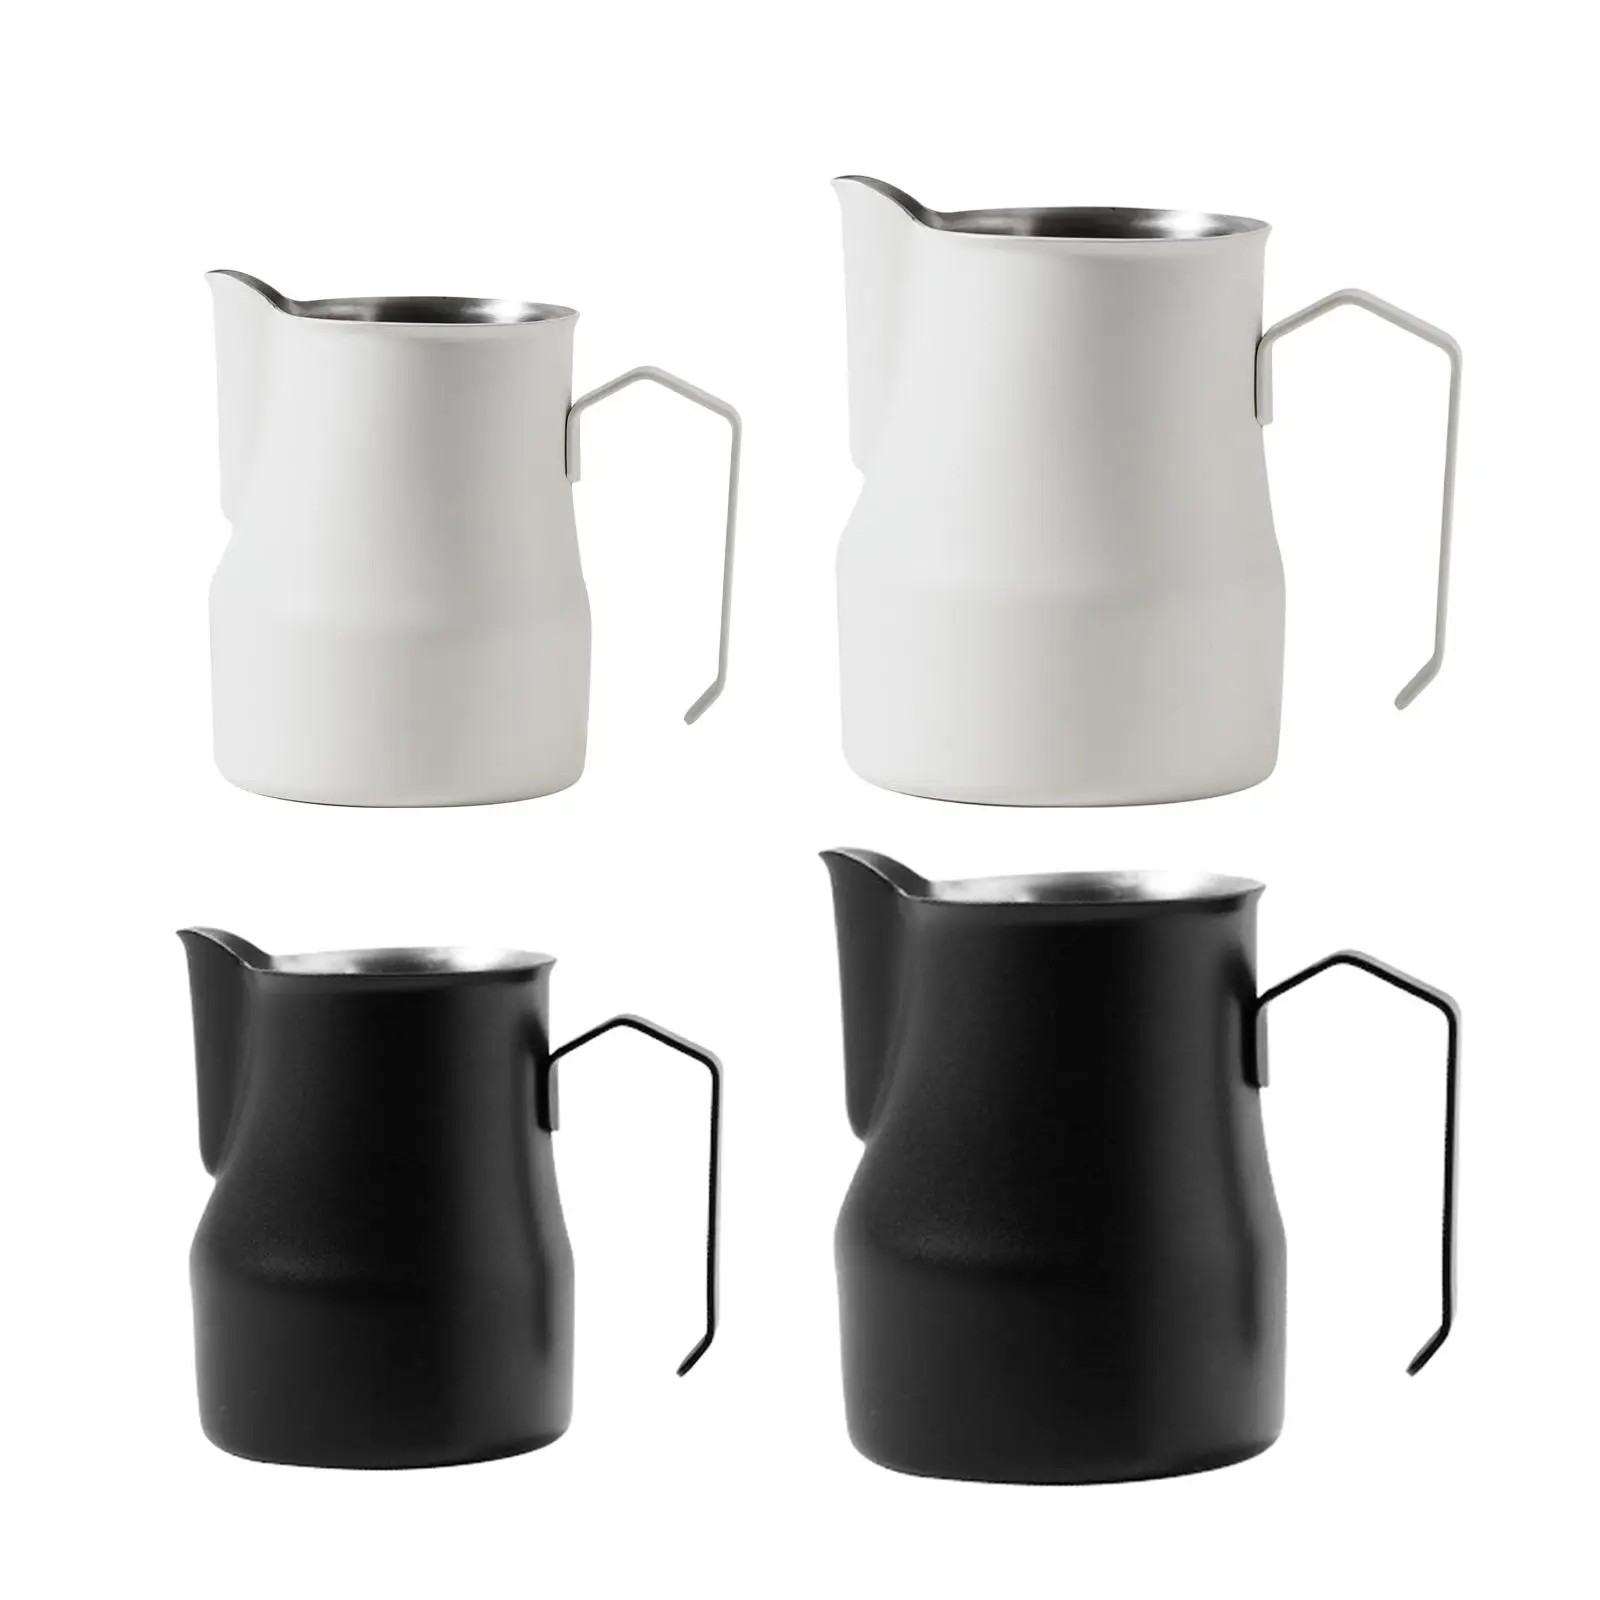 Coffee Milk Measuring Cup Espresso Machine Accessory Coffee Milk Frothing Jug for DIY Coffee Kitchen Latte Art Cappuccino Cafe